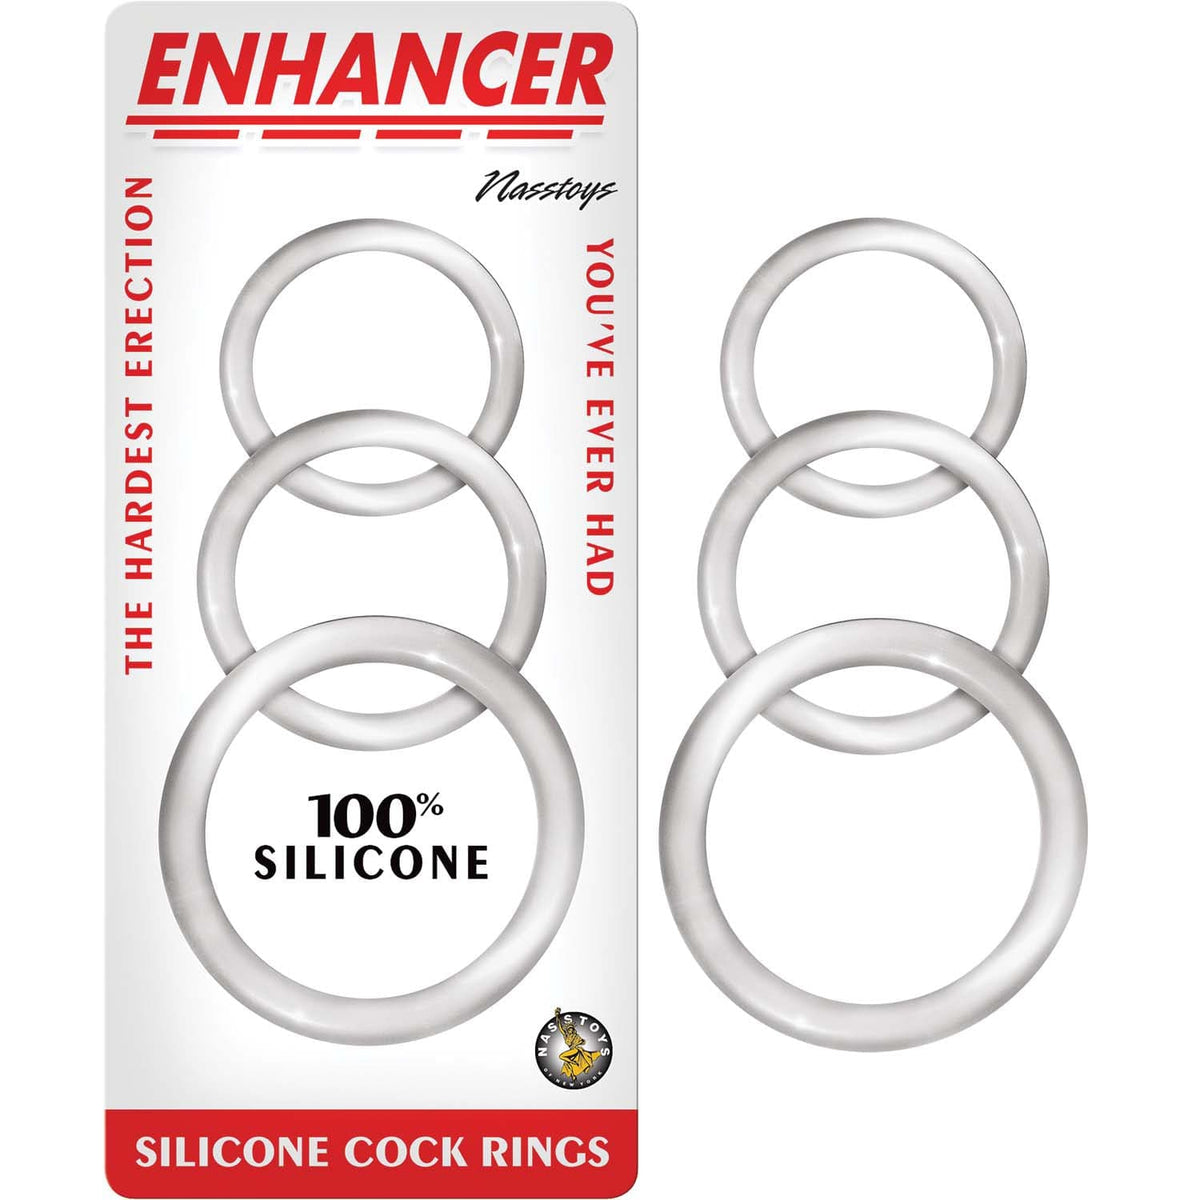 enhancer silicone cockrings clear